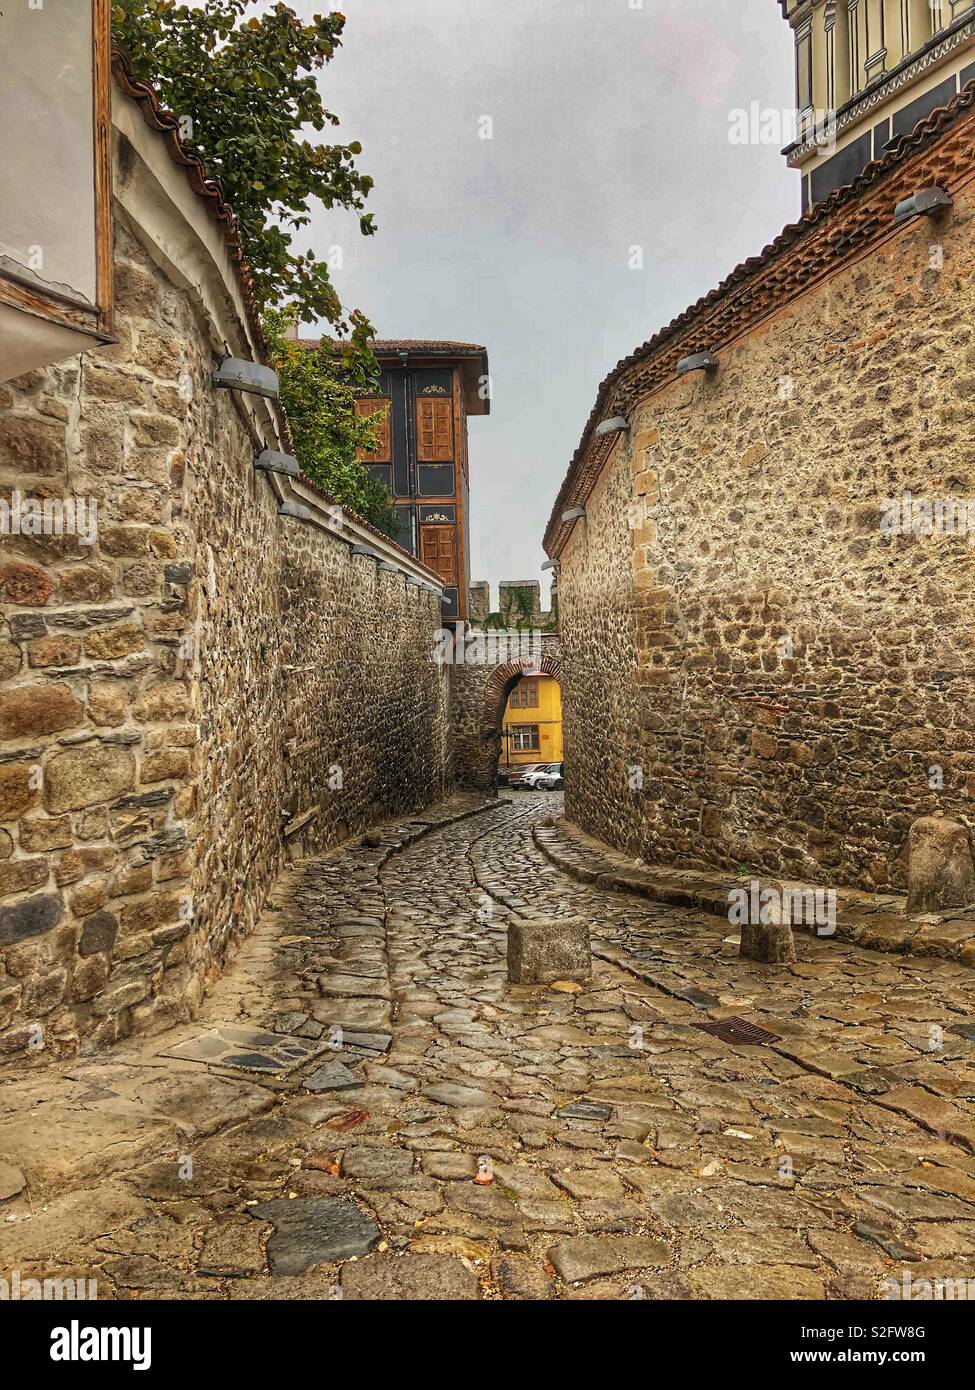 Old medieval town of Plovdiv, Bulgaria. Stock Photo